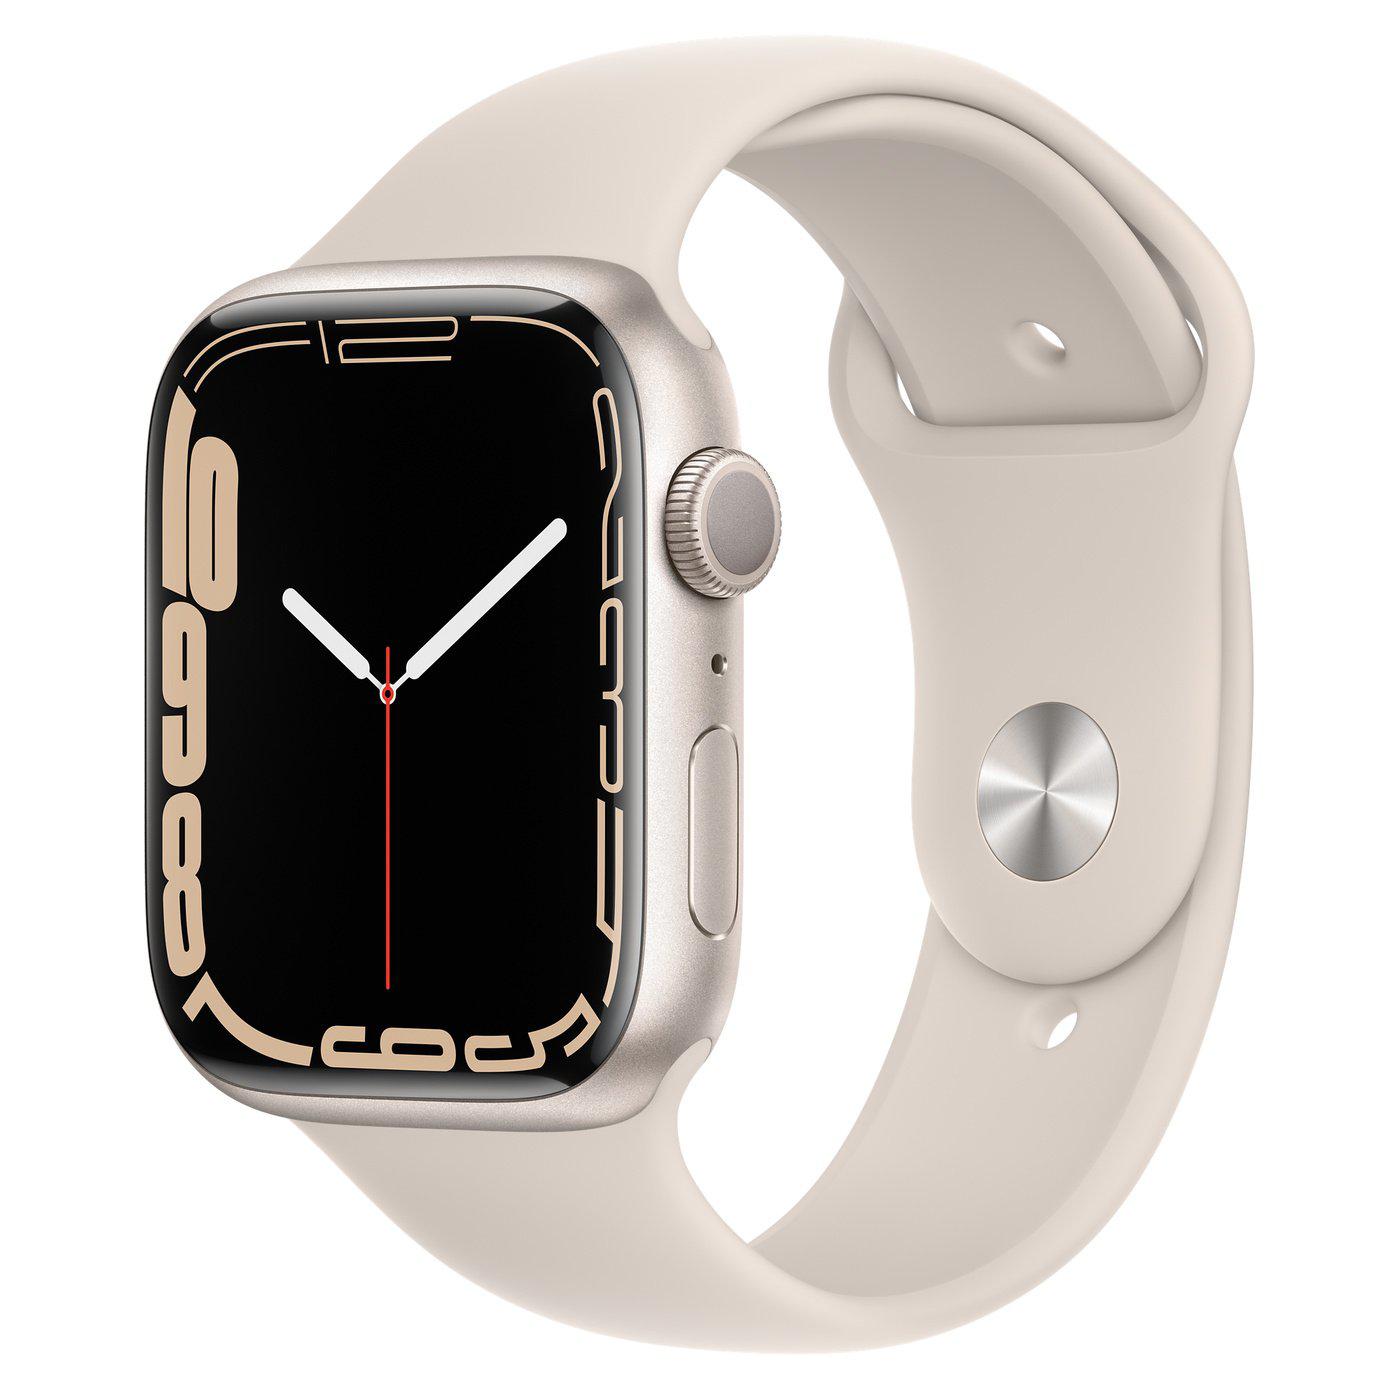 Apple Watch Series 7 41mm GPS + Cellular Starlight Aluminium White Sport Band - Refurbished Excellent